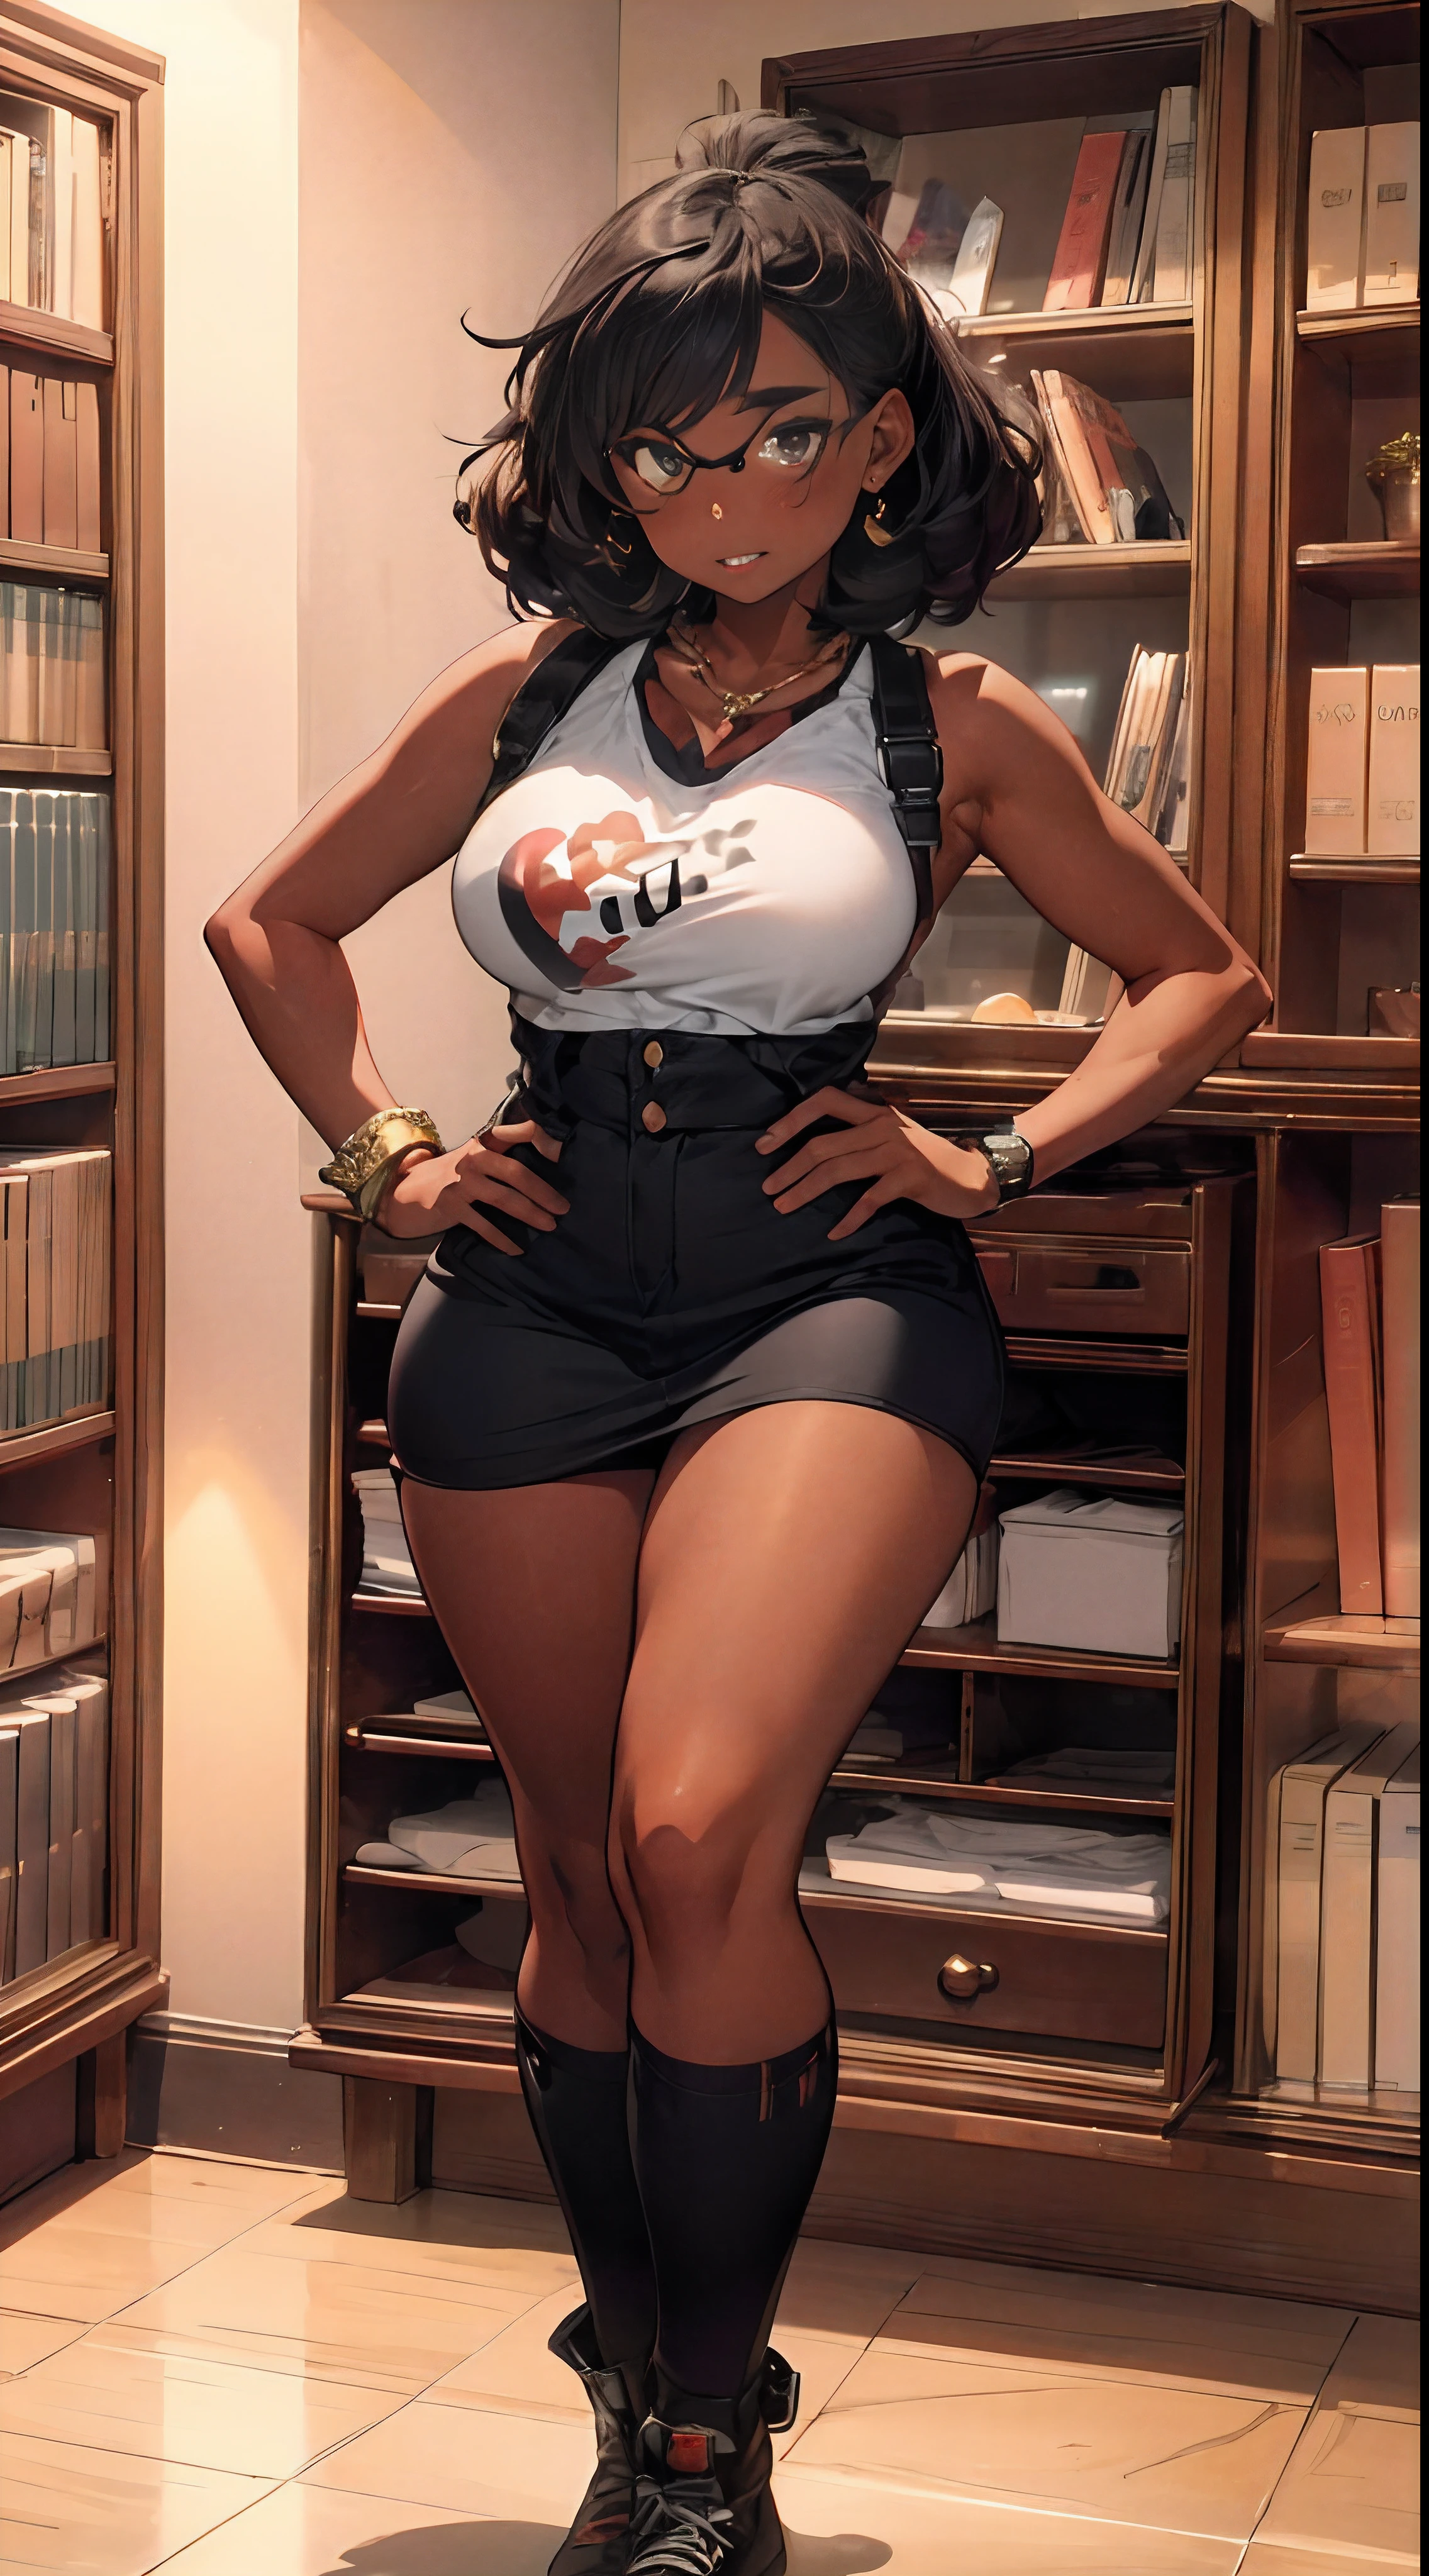 (((dark-skinned))), (bookworm, 25-year-old Mahagony-skinned,  darkskin statuesque oblong-shaped face,vivacious black eyes, prominently narrowed convex hooked nose, hourglass physique,thick, alluring, large breasts, large butt, heart hips, long, toned legs, messy pixie bun, glasses,  sweater dress, high definition, 96k, fullbody, risky, vivd,Graffiti graphic novel, digital masterpiece,) (sultry and strong,beautiful, toned, Golden Ratio physique ((mystifying Ultra Detailed Iris,))  Extremely Detailed Body and Wide Hips. The character should have intricately accurate facial and physical structure* intricately realistic expression and emotion* accurate colored complexion* accurate clothing design* complex hairstyles* and intricate character detail. Human realistic features) ::10  (, sensual energetic atomsphere, perfect prompt, perfect prose, Unreal Engine 5, Cinema, Ultra wide angle, Depth of field, Hyper detail, Fine details, Fabric texture, erotica,, Depth of field, Tilt blur, white balance, k , super resolution, megapixel, VR, single, good, ambient light, half light, backlight, natural light, incandescent light, optical fiber, dark light, cinematic light, studio light, soft light, ambient light, contrast light, beautiful light, accent light, general lighting, screen space general illumination, ray traced global illumination, optics, diffuse , Glow, Shadows, Rough, Glow, Raytraced Reflections, Clearance Reflections, Screen Space Reflections, Diffractive Gradation, Chromatic Aberration, GB ent Offset, Sweep Lines, Ray Tracing, Ambient Light Occlusion,Anti-Aliasing, FKAA, TXAA, RTX, SSAO, MSAAx4, shaders, OpenGL shaders, GLSL shaders, post-processing, post-processing, cell shading, tone mapping, CG, visual effects, sound effects, incredibly detailed and complex, hyper-maximal, elegant, hyper-realistic, super-detailed, dynamic pose)))